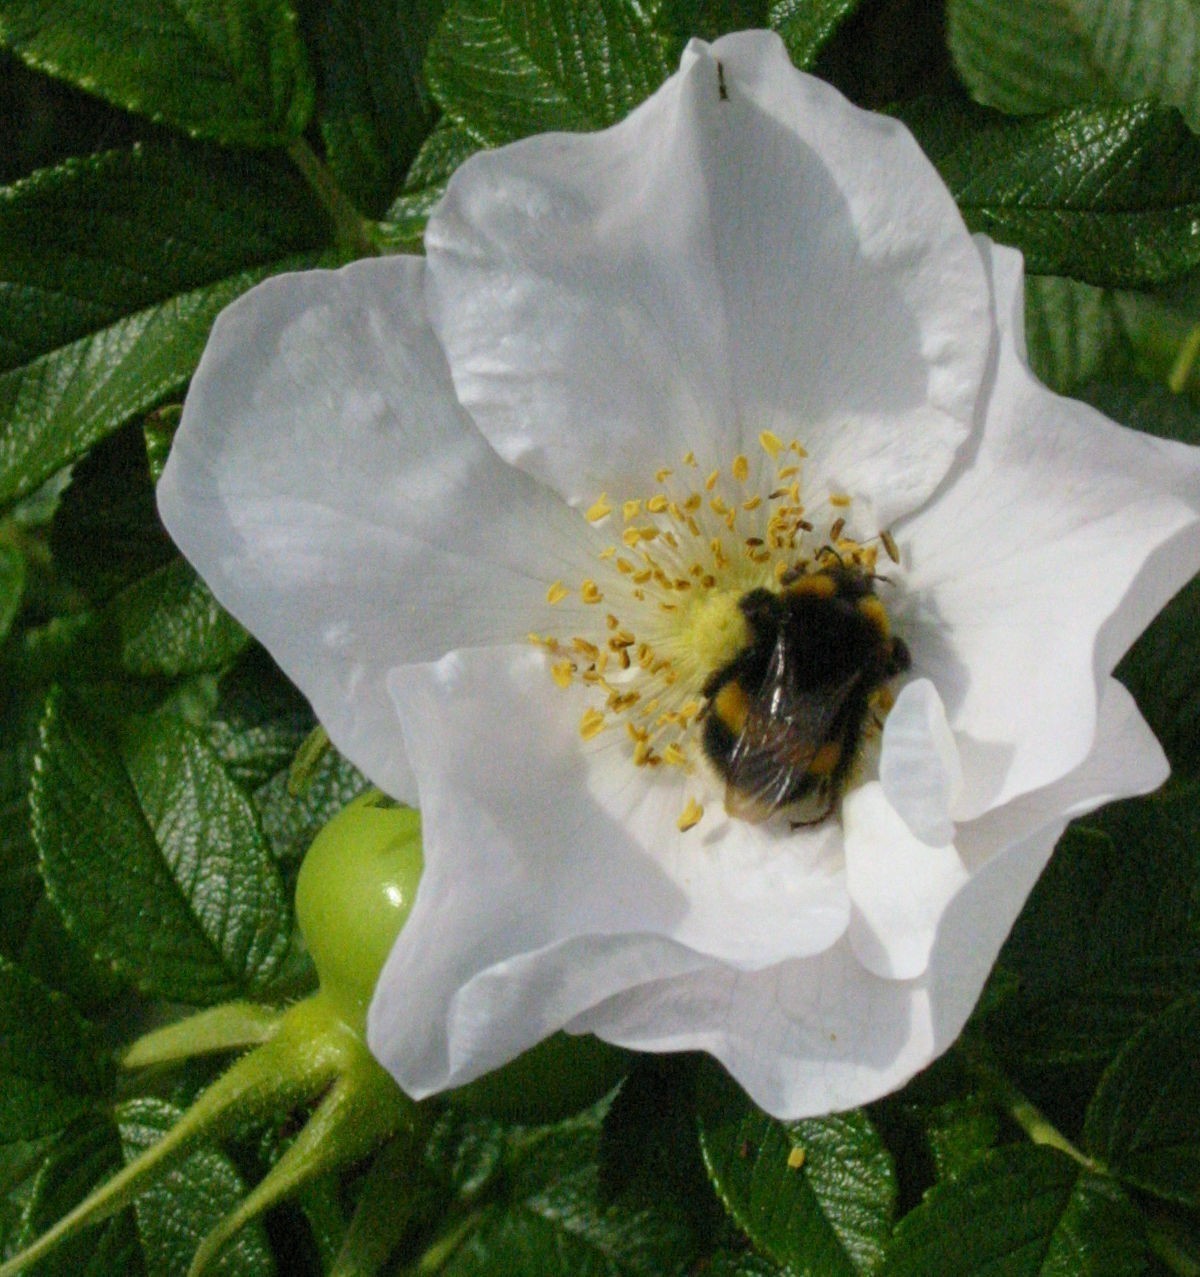 With bee and immature rosehip. There can be a variation of flower colour from white to deep pink